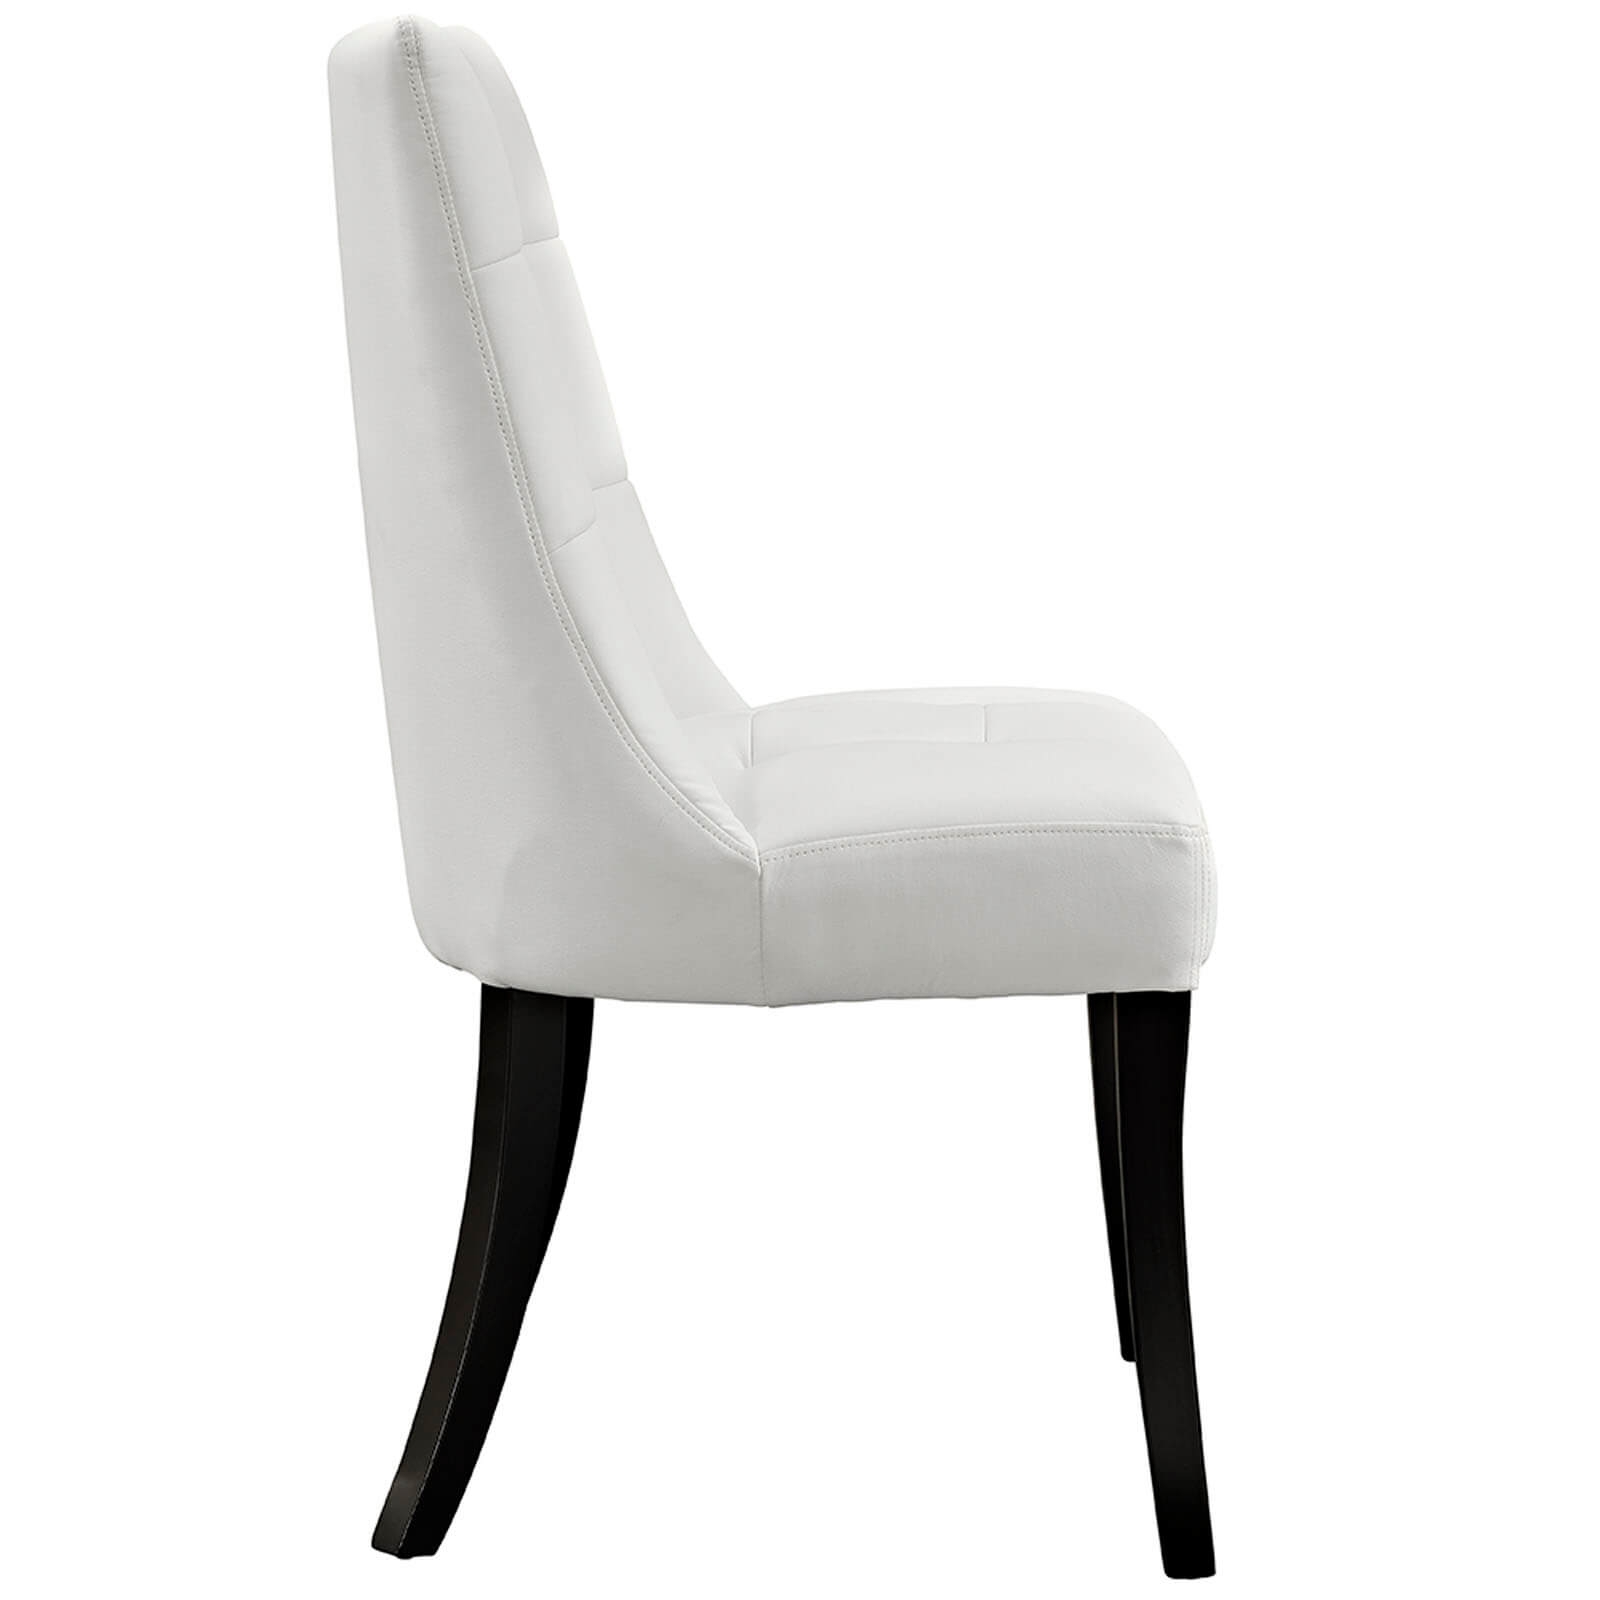 Upholstered dining chair sidev view